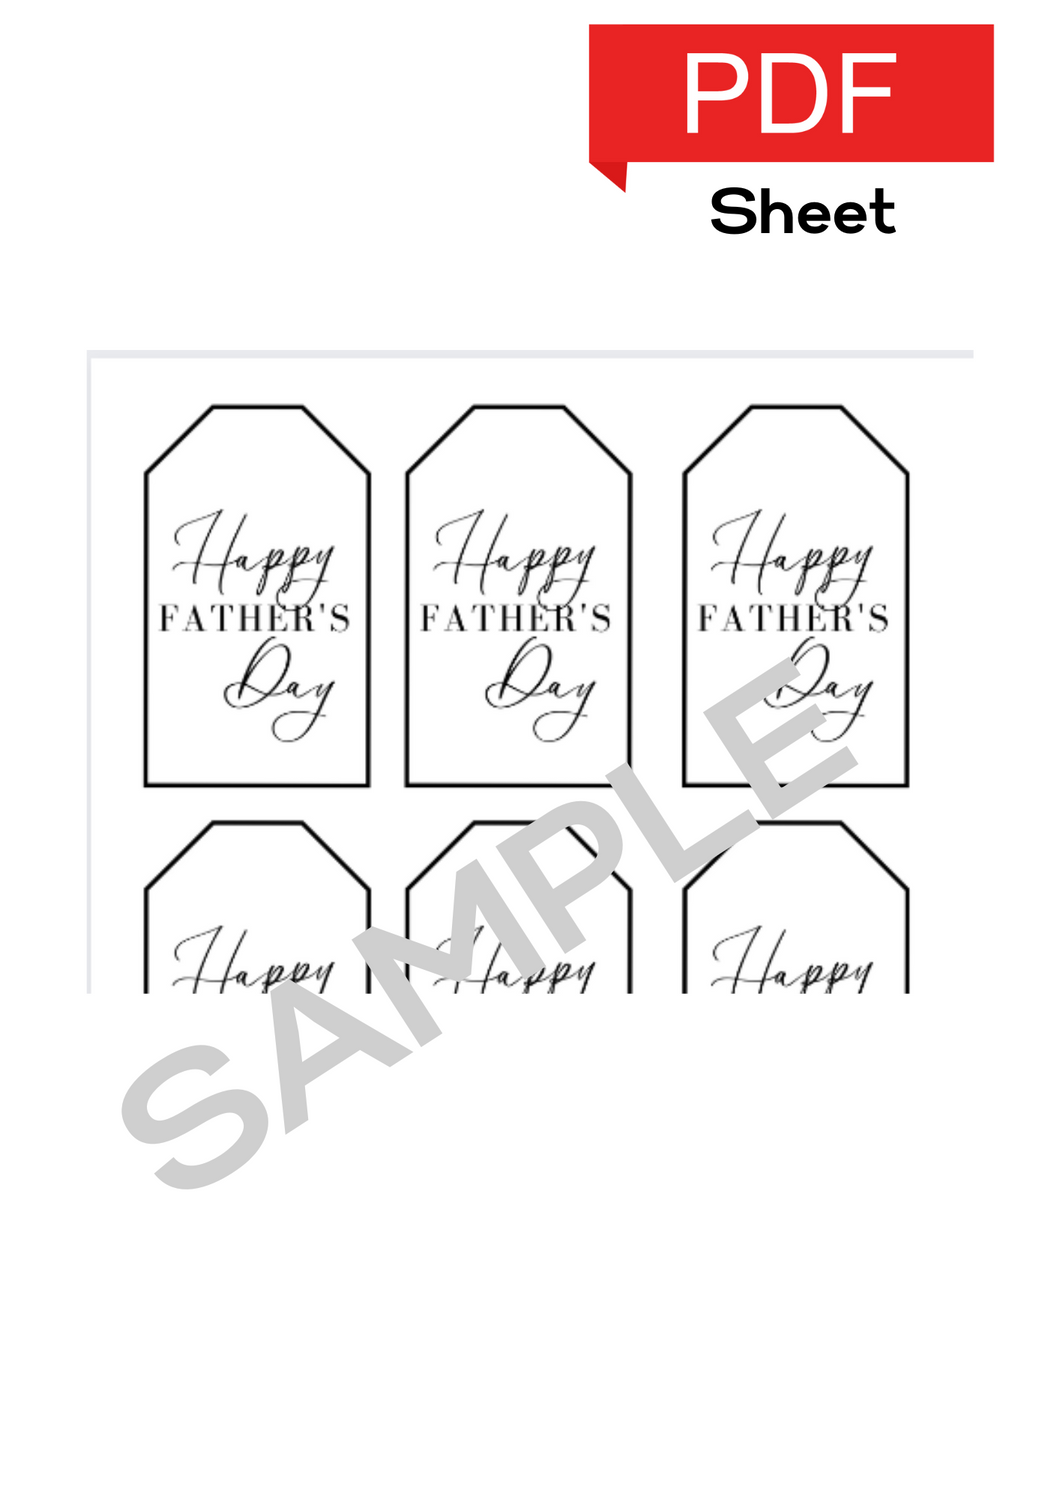 Father's Day Sheet (White)